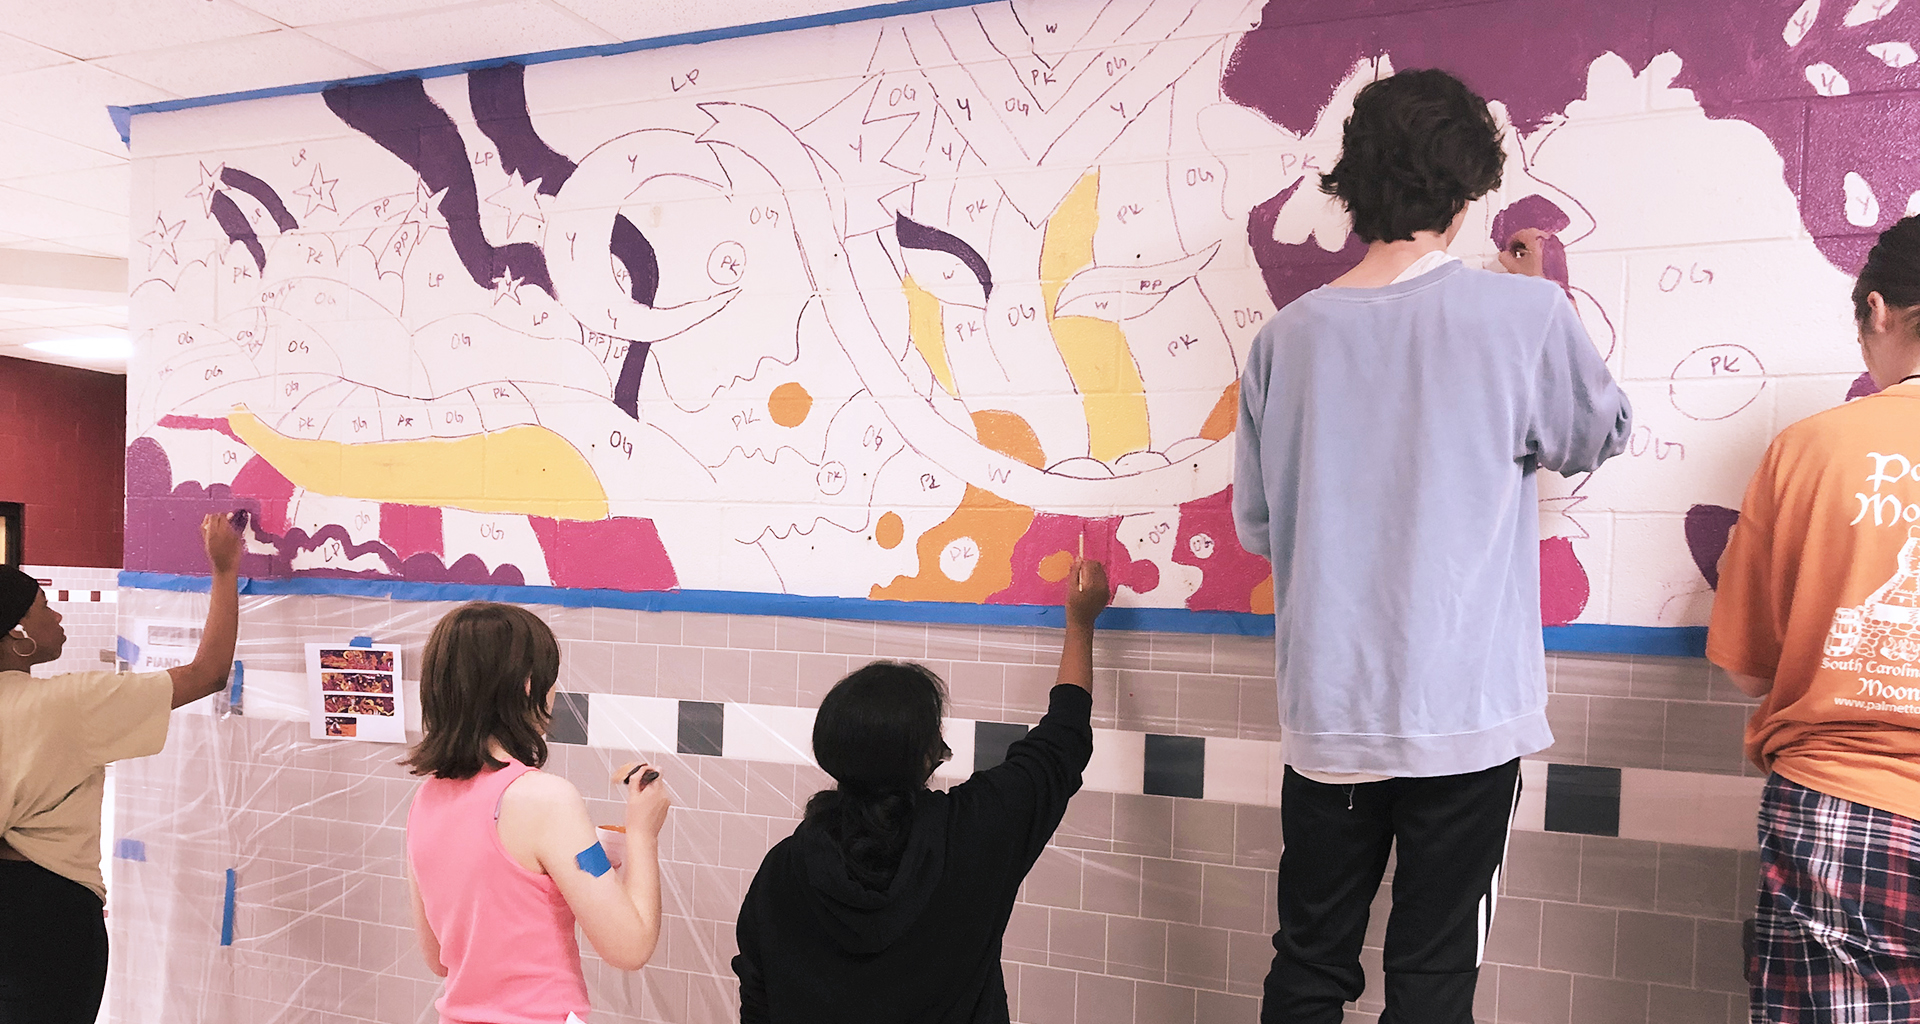 Several students working on a hallway mural.